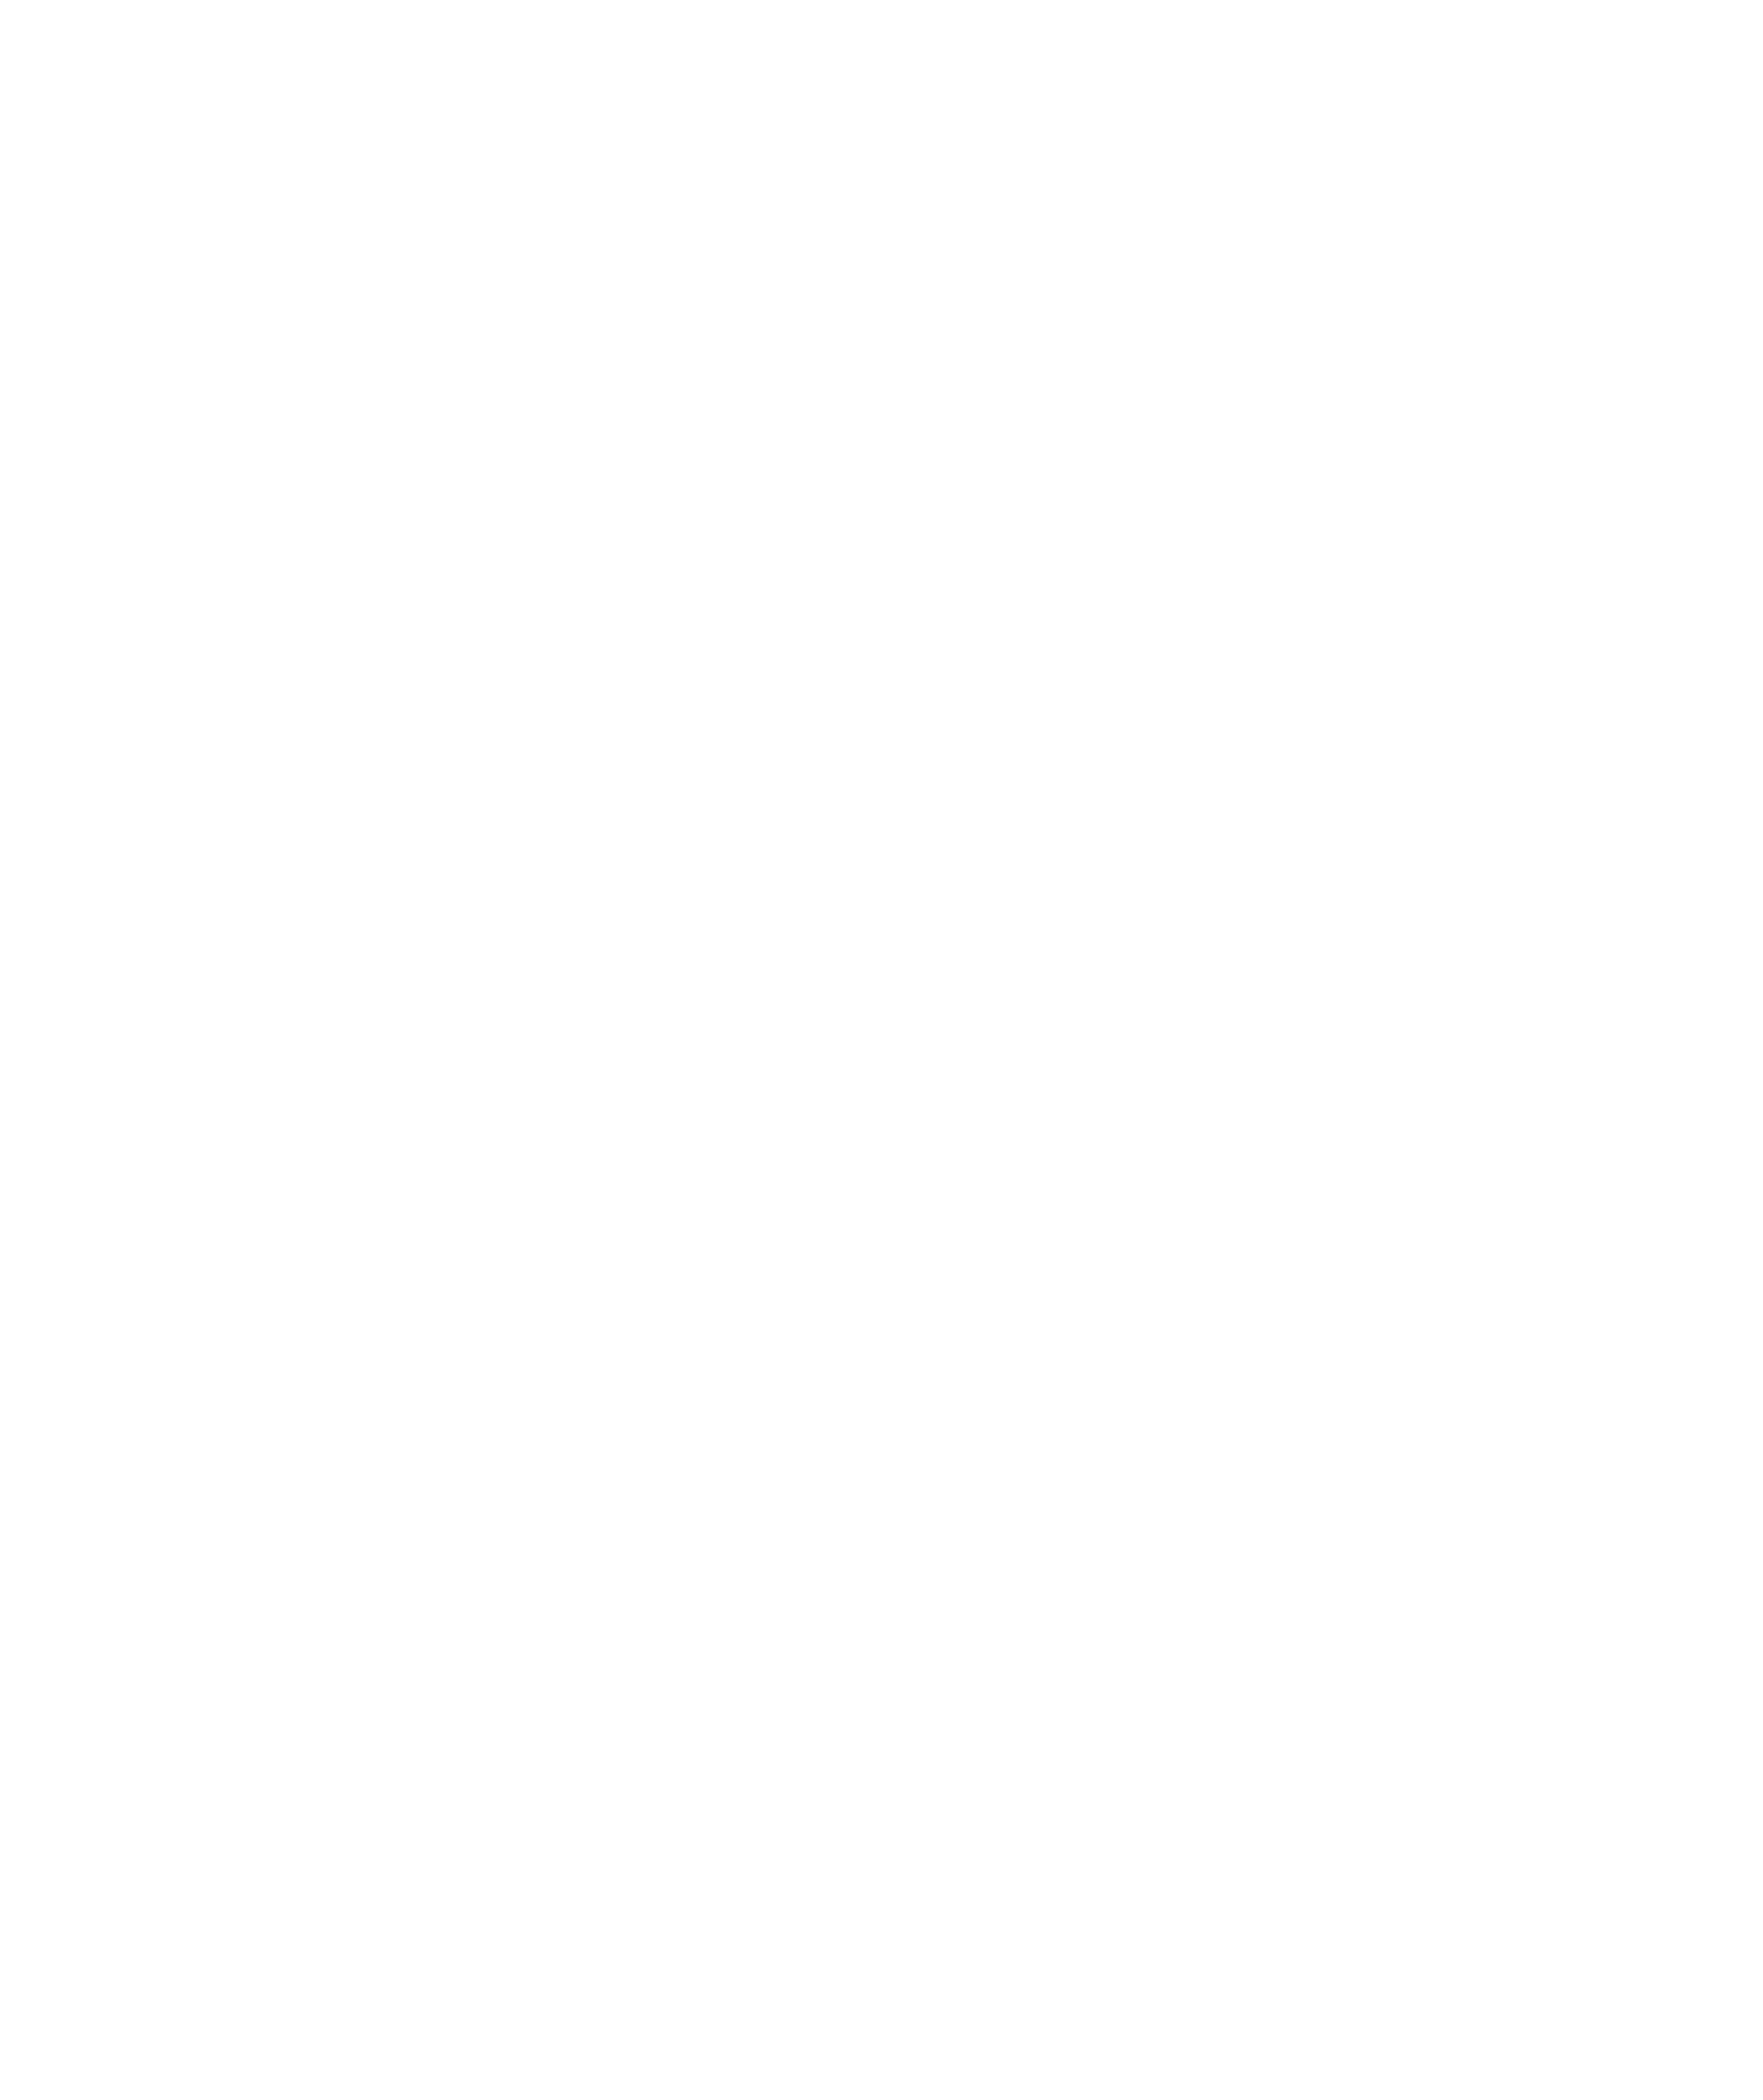 Merry Christmas and Happy New Year Transparent PNG Clip Art